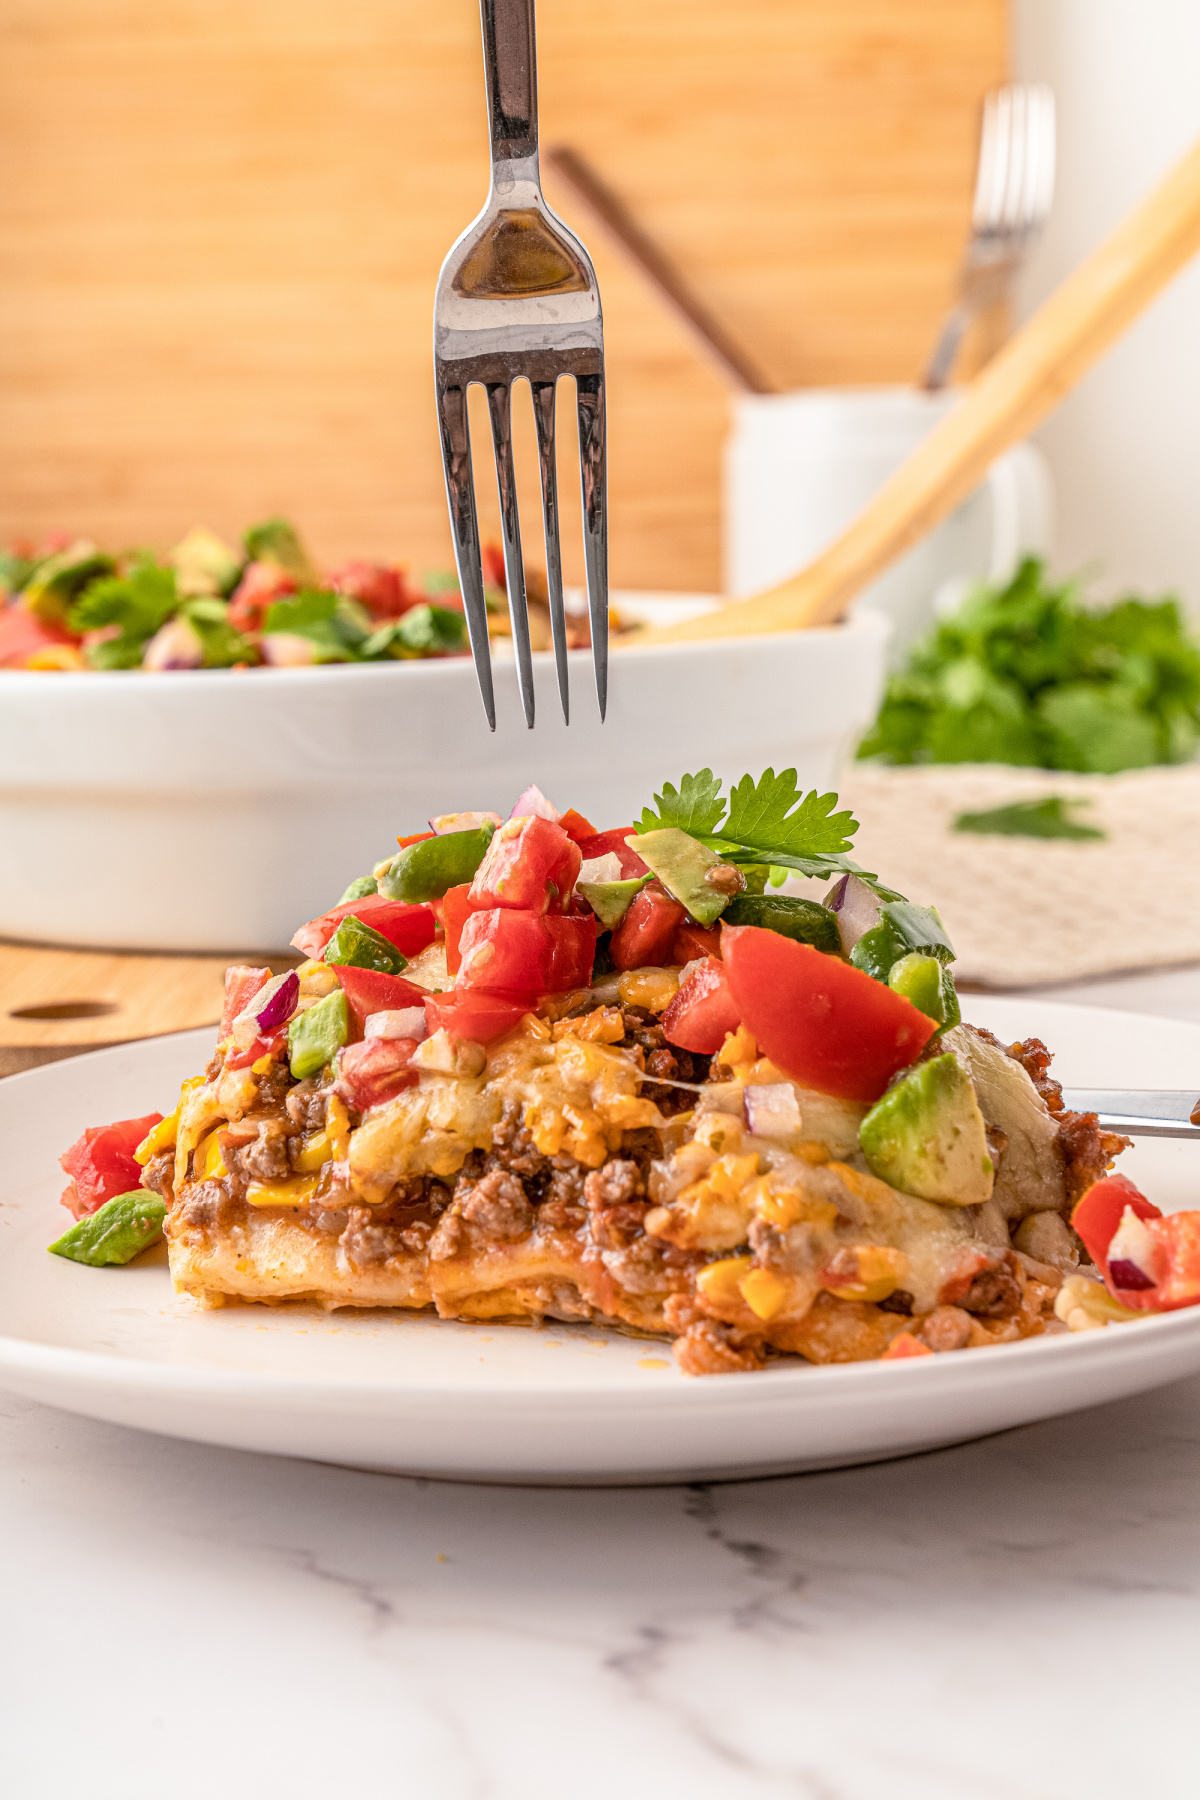 Layered Mexican Taco Lasagna Casserole with ground beef, beans, tomatoes and cheese, avocado, sour cream and lettuce